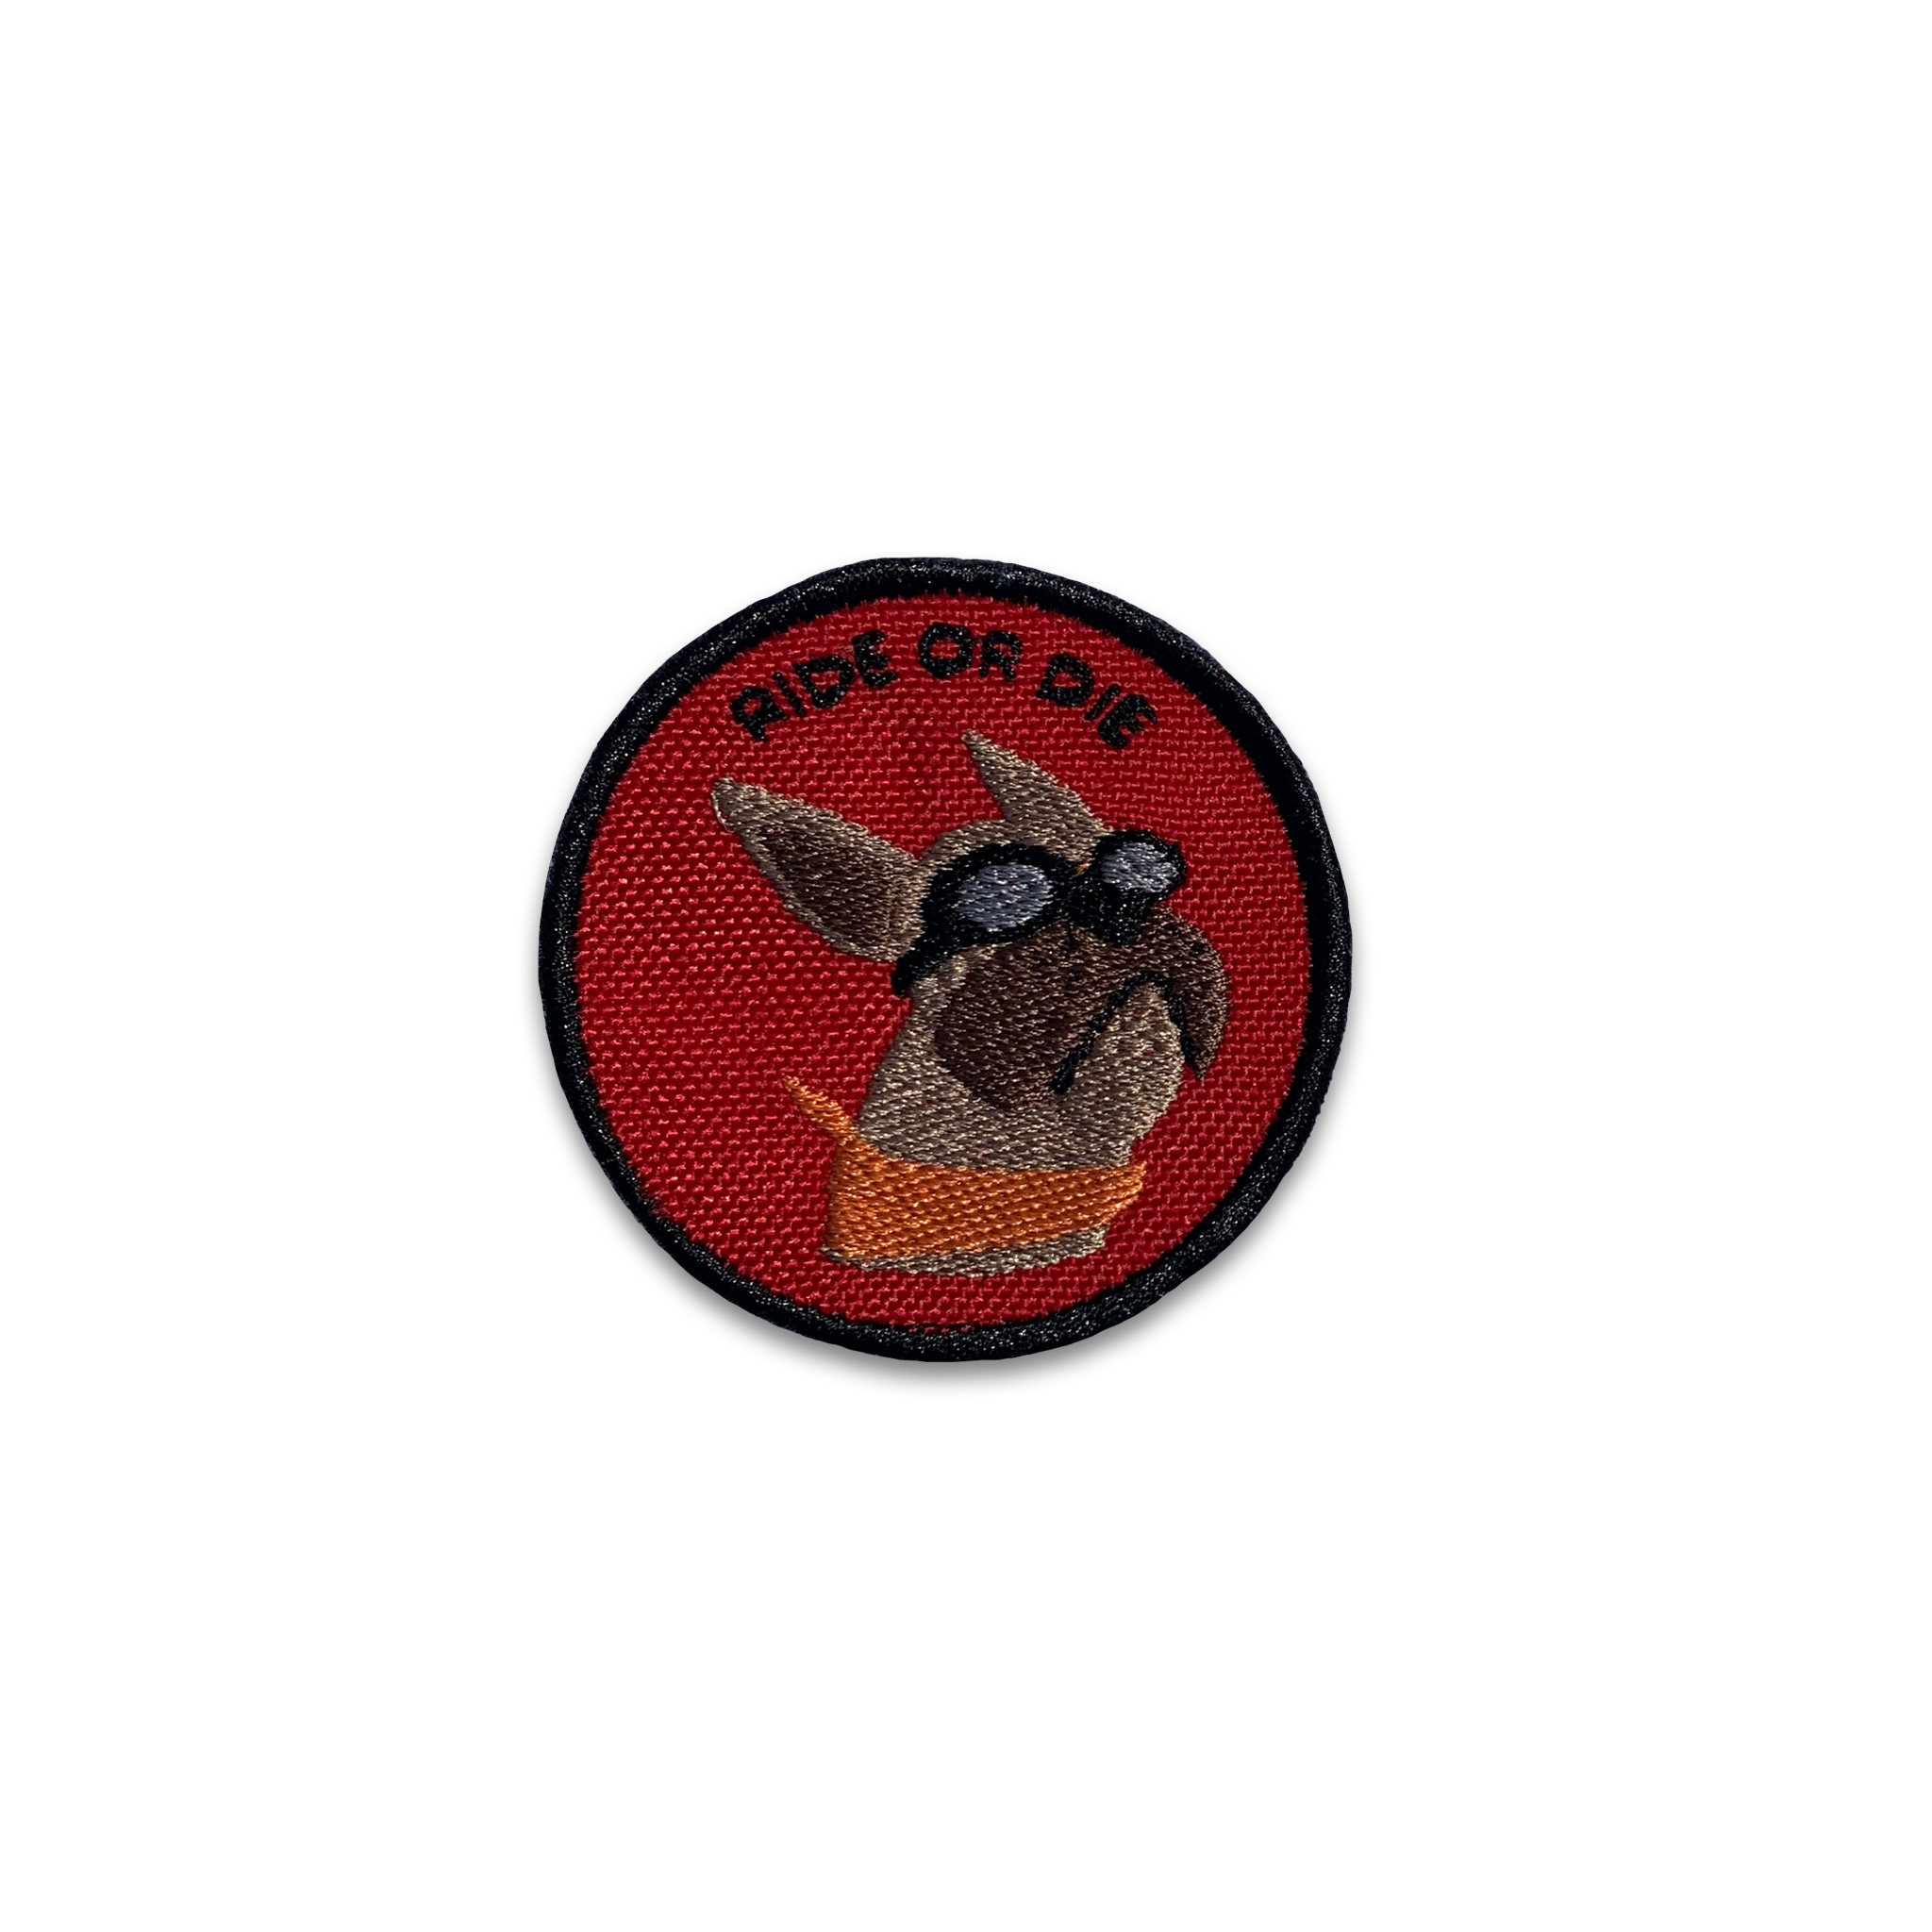 PreMadePatches_Red_RideorDie_Shopify_2dbb5a5d-7911-42c4-b375-7c2a082abd41.png